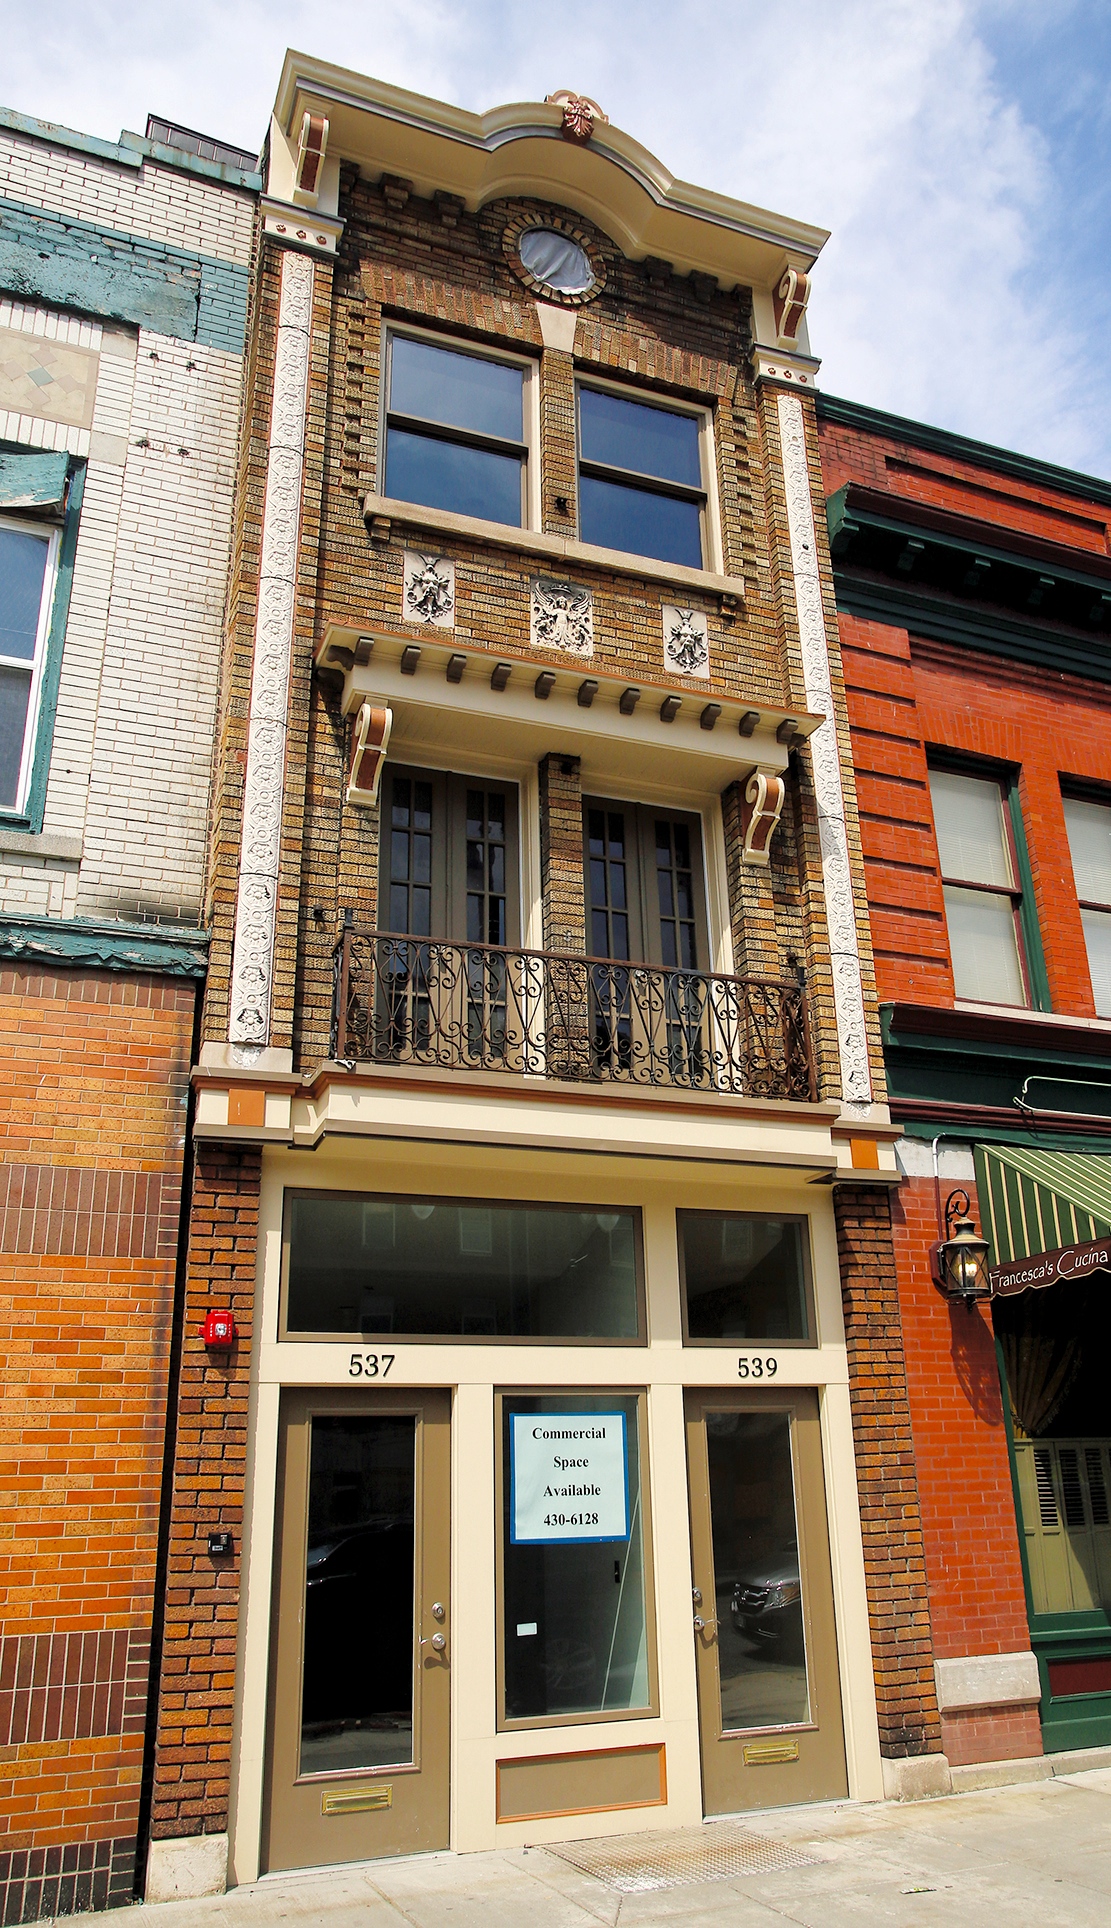 What may be Syracuse's skinniest building, 537-539 N. Salina St., has been renovated into commercial space on the street level and an apartment upstairs.